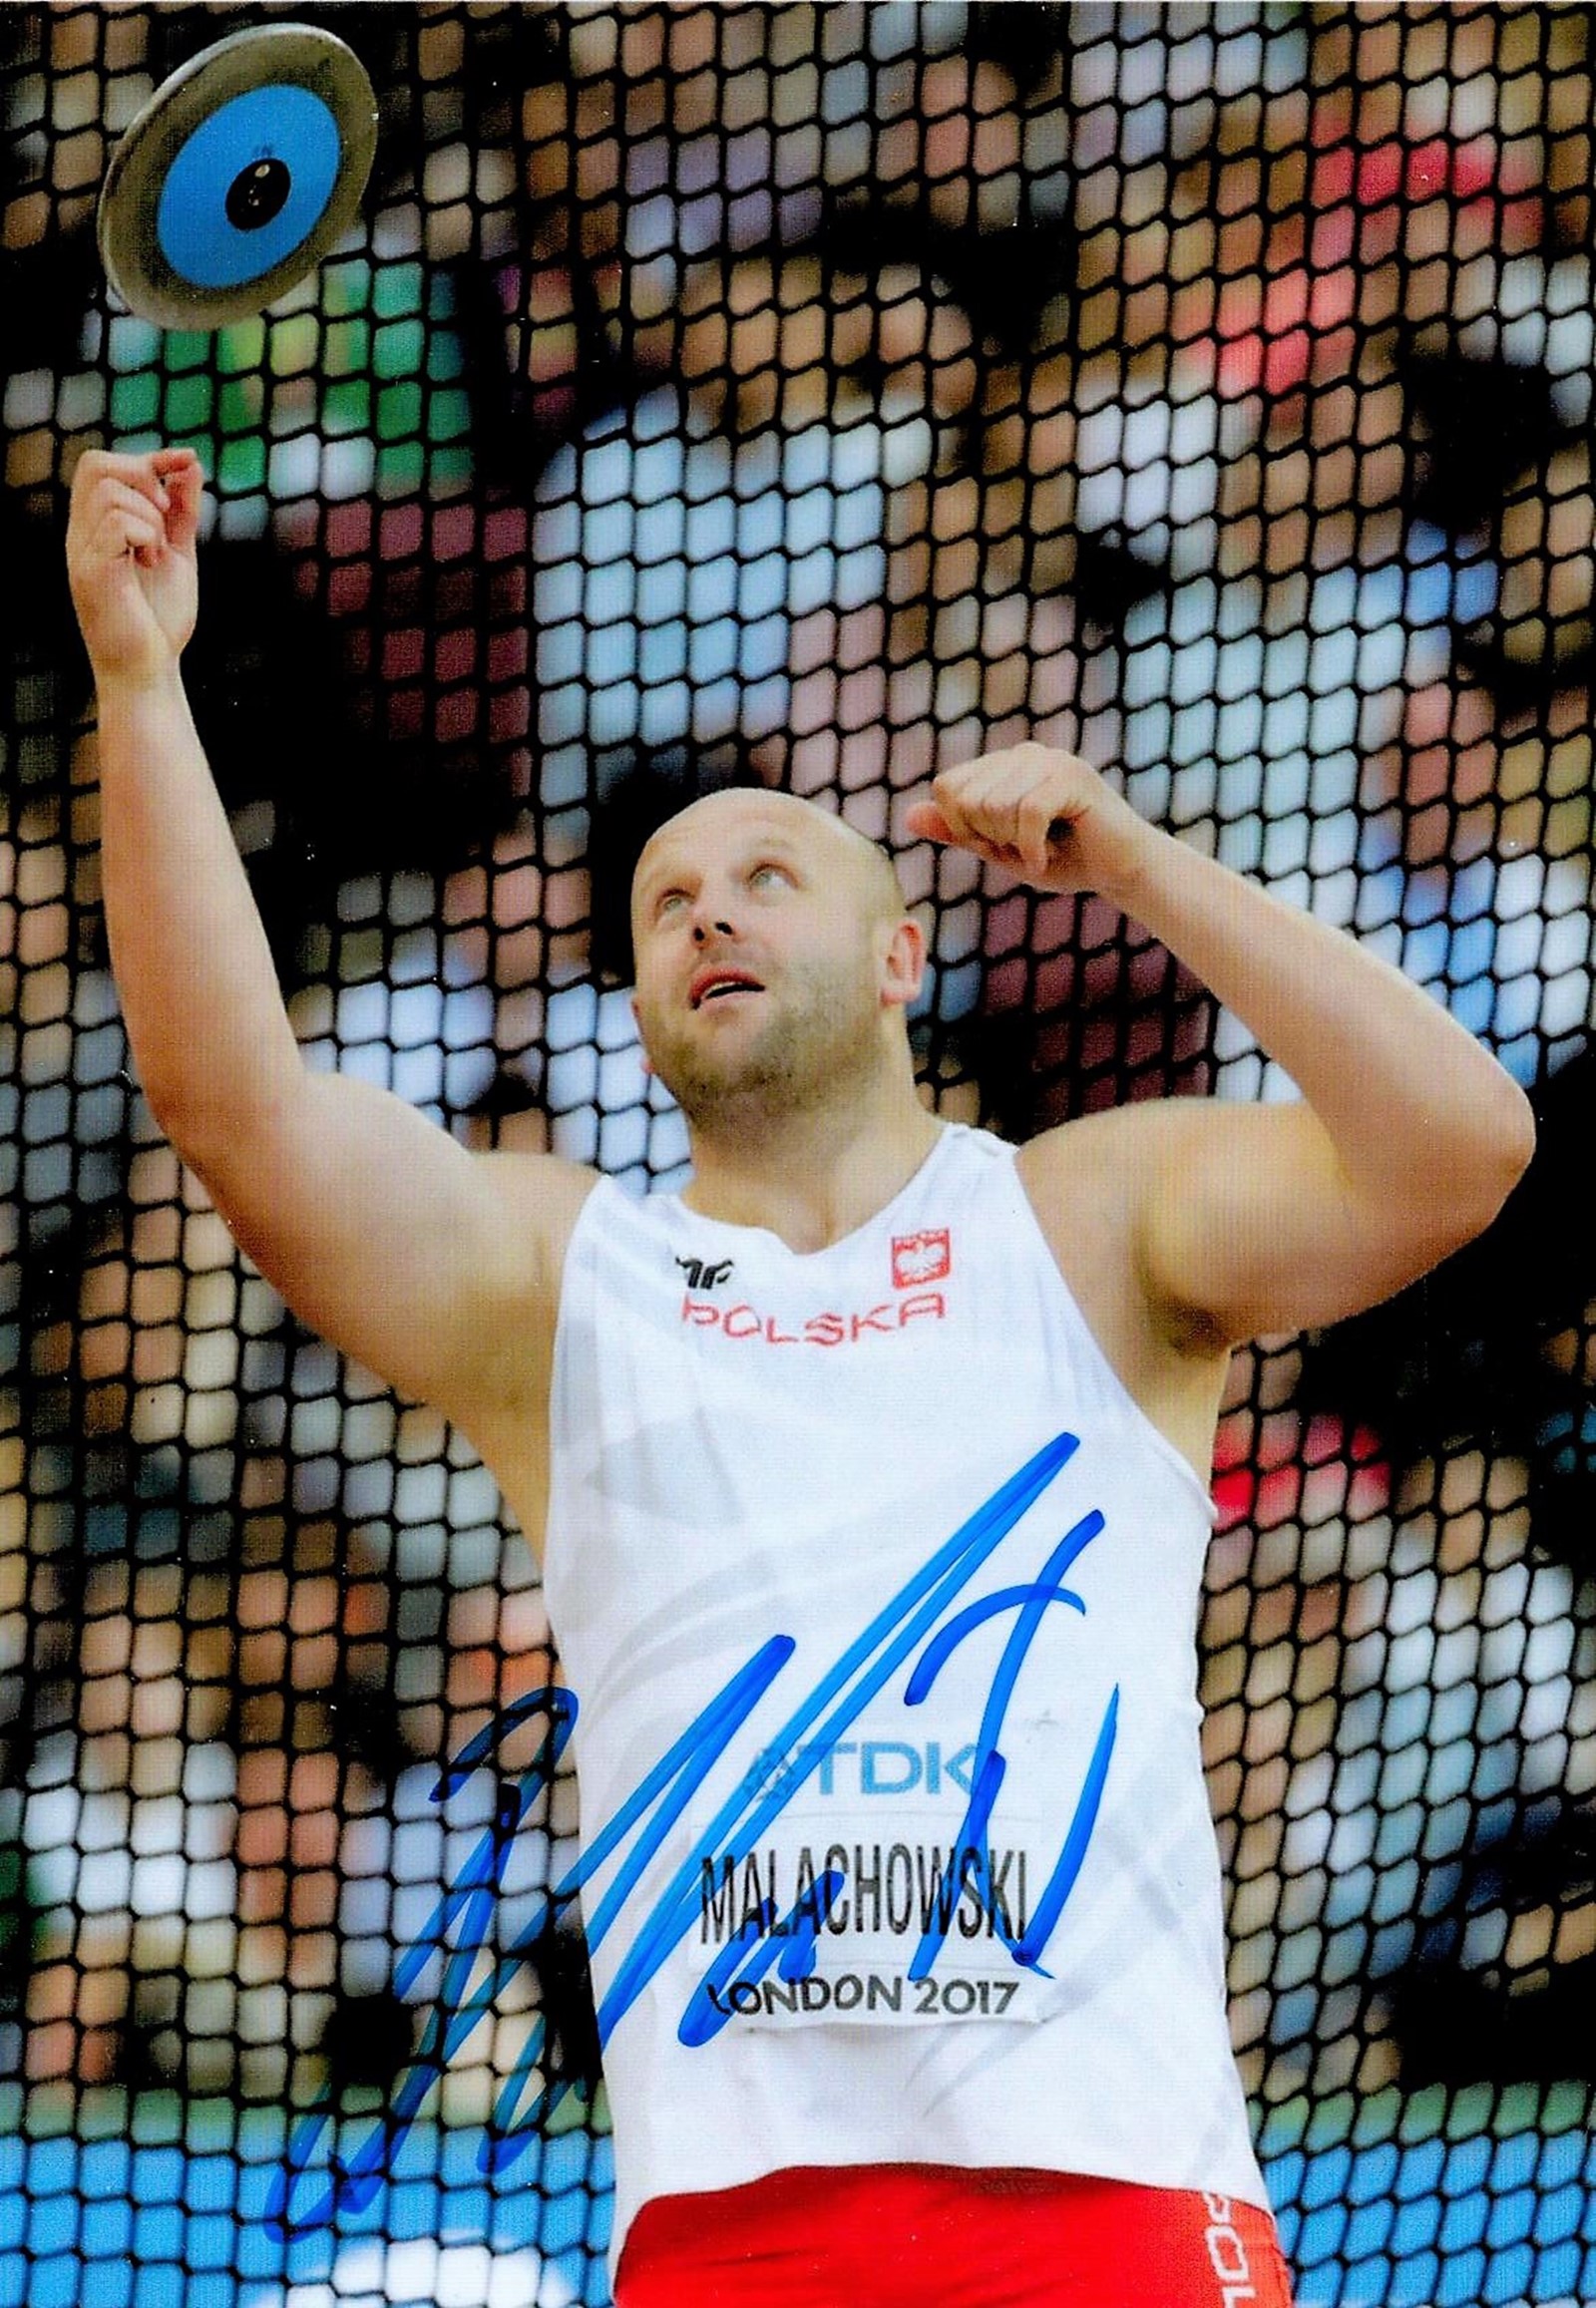 Olympics Piotr Malachowski signed 6x4 colour photo silver medallist in the mens discus event in